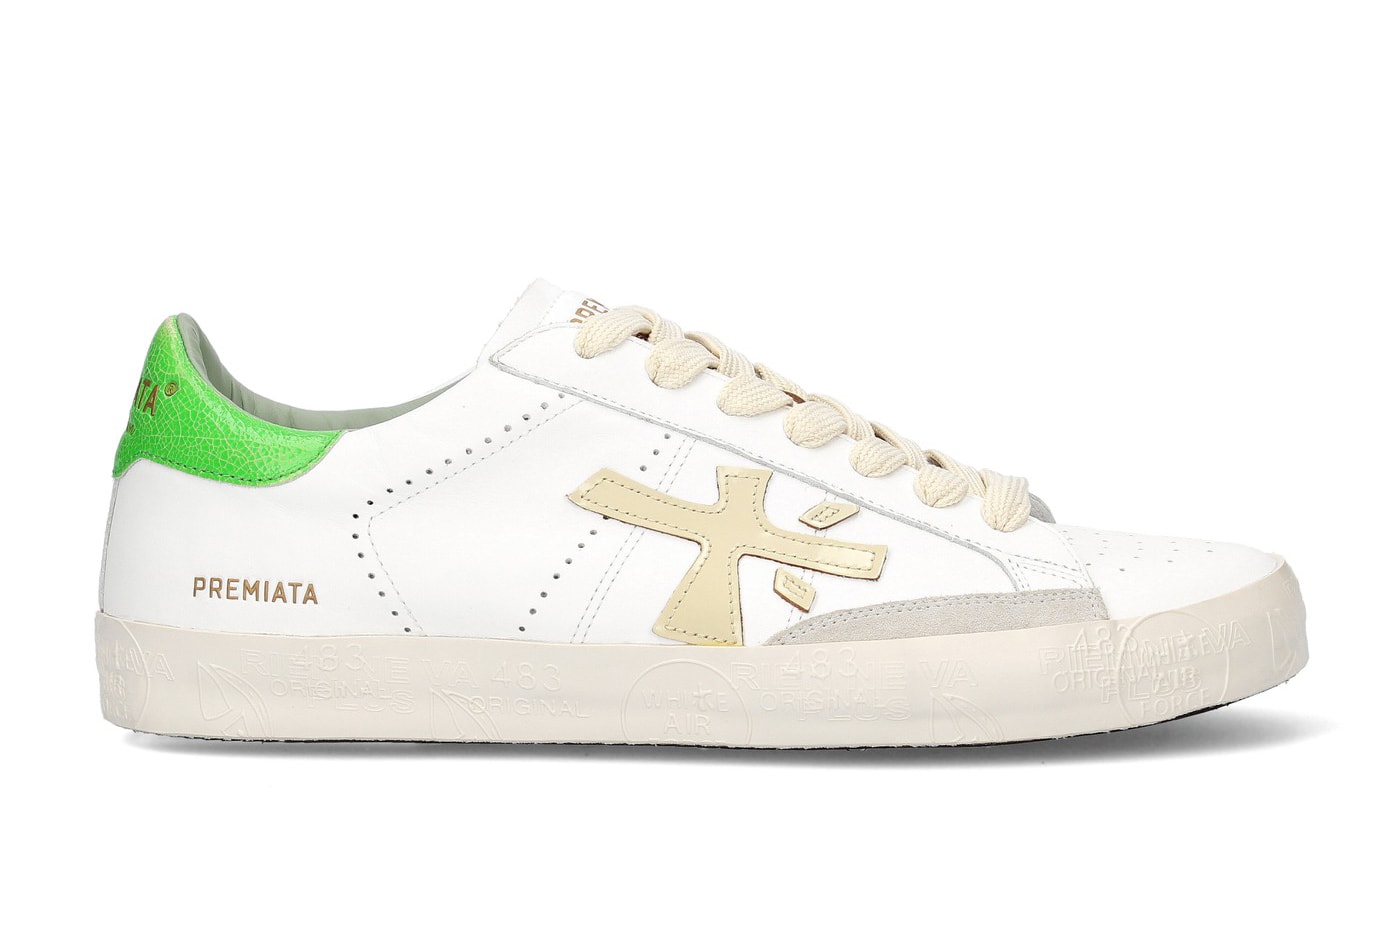 premiata ss20 steven collection range sneakers footwear timeless court classic 90s